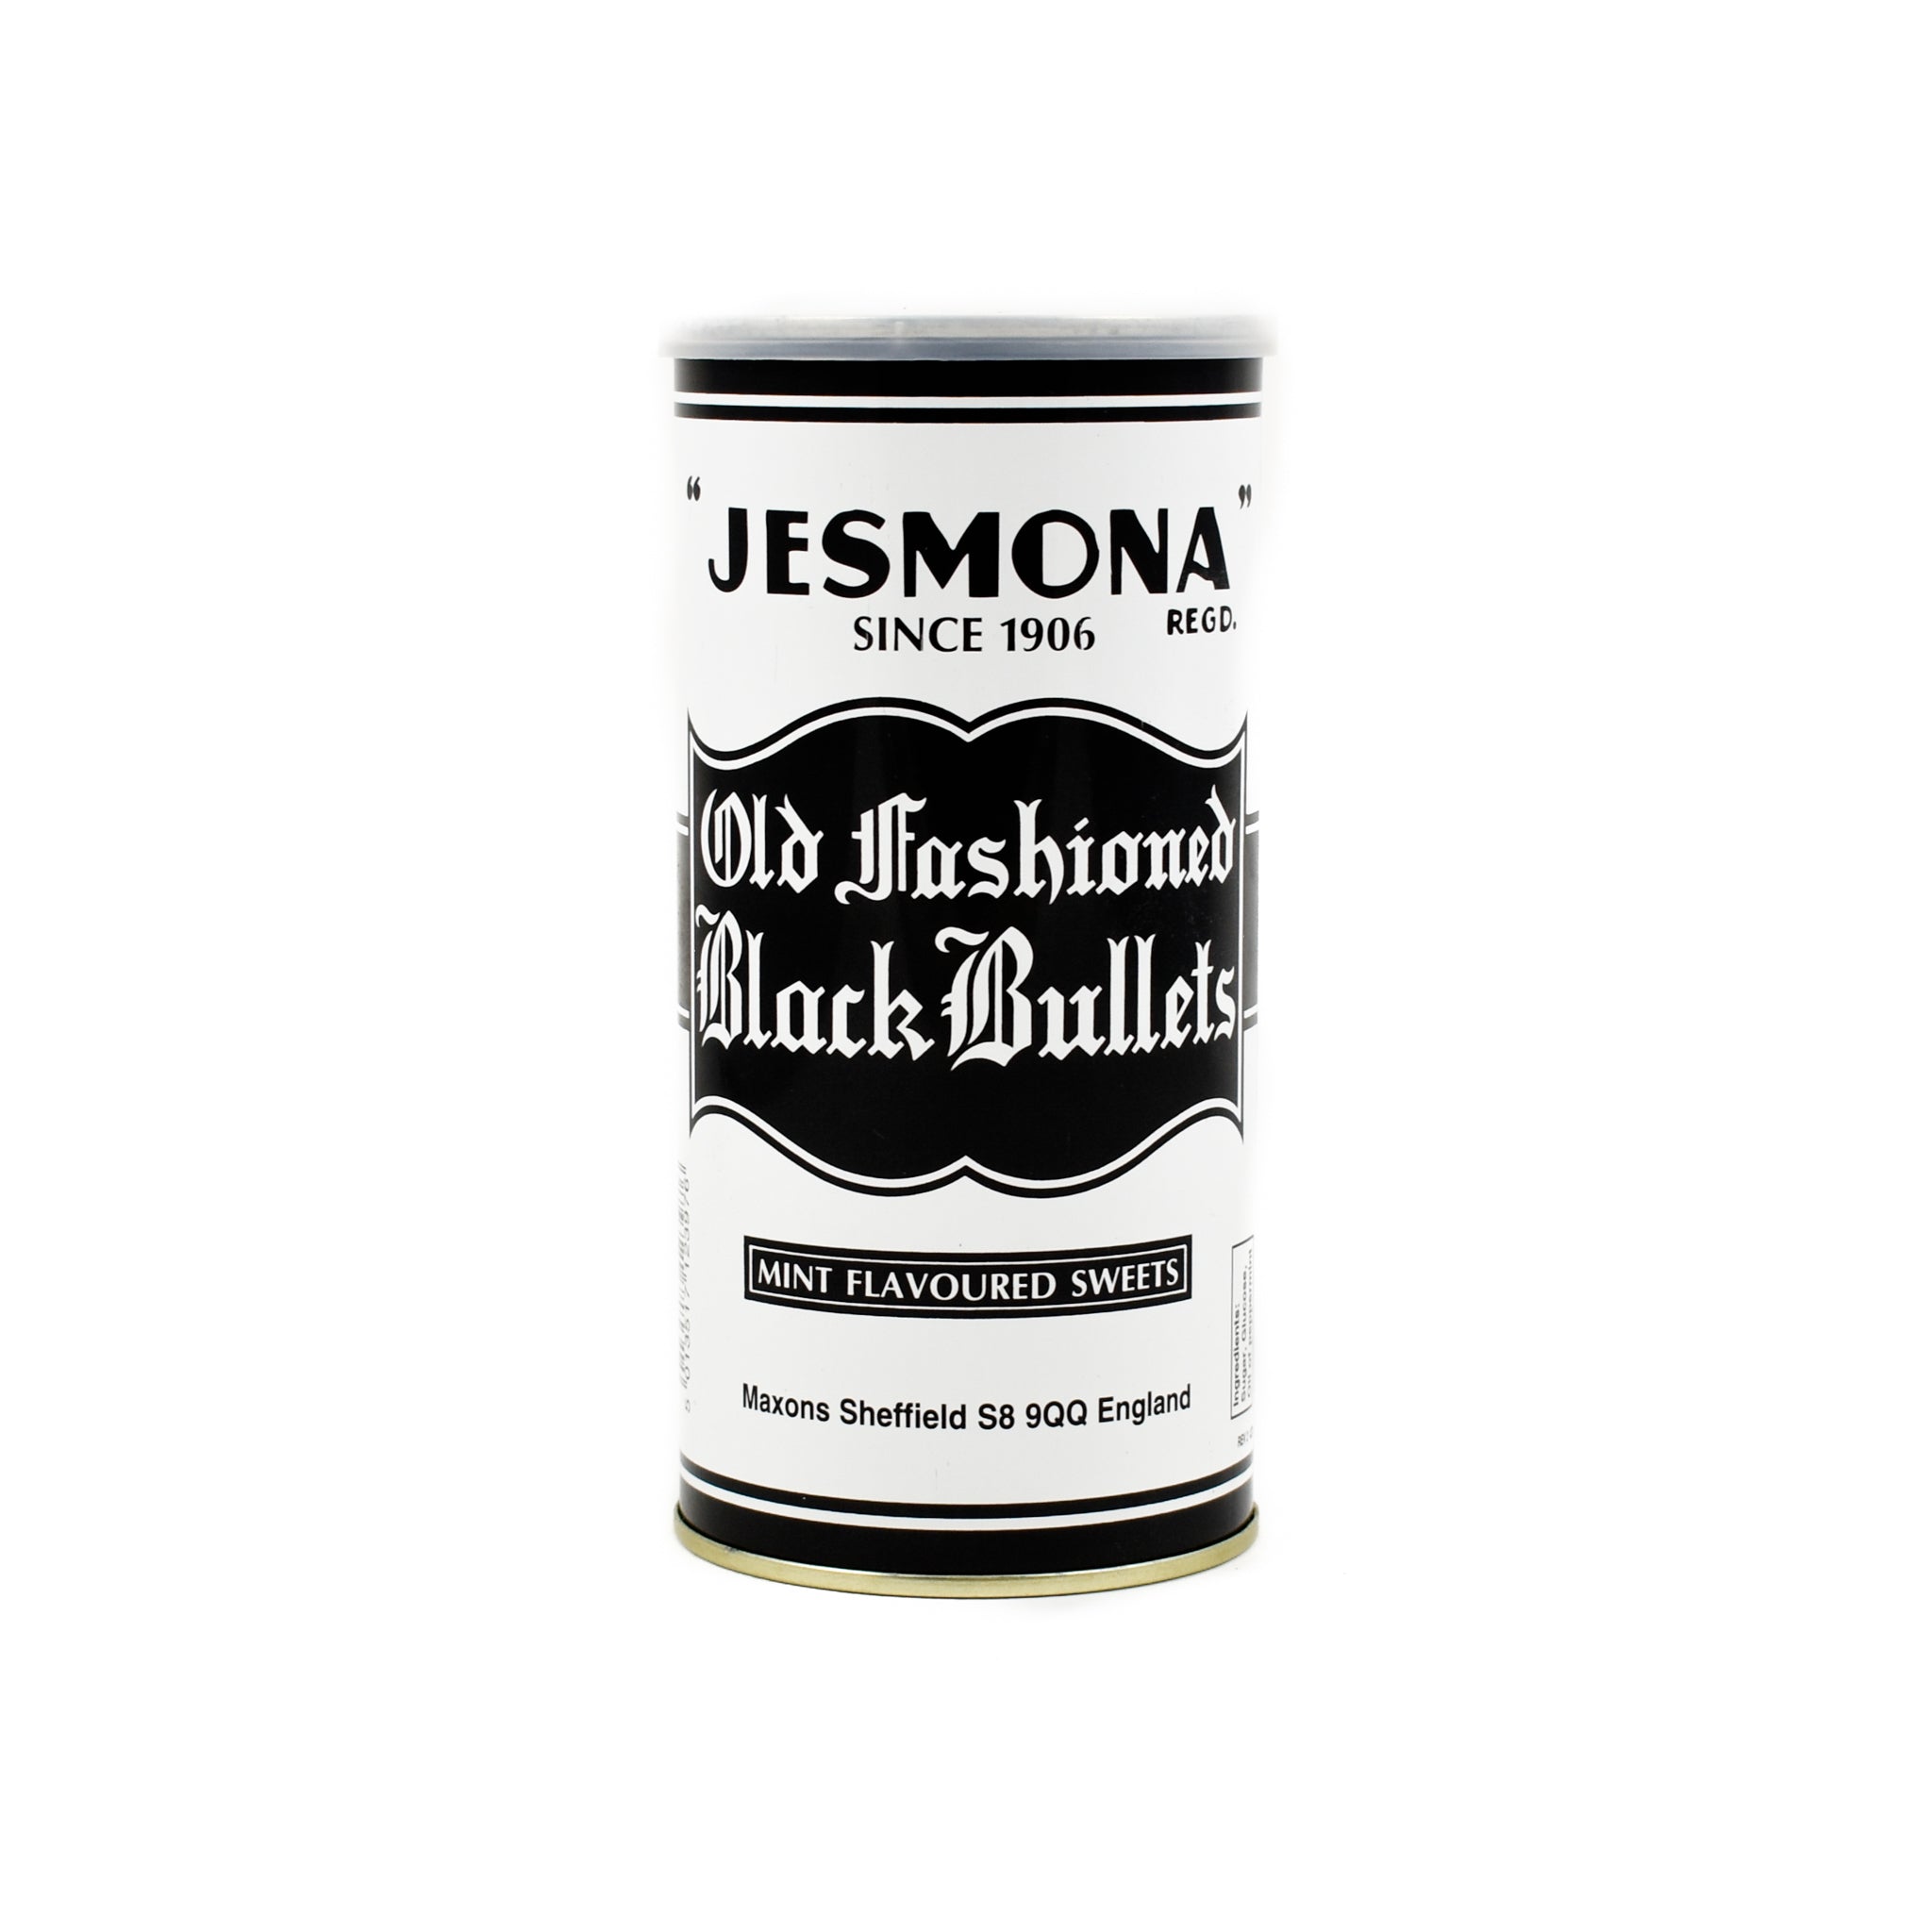 Jesmona Old Fashioned Black Bullets 500g Ingredients Chocolate Bars & Confectionery